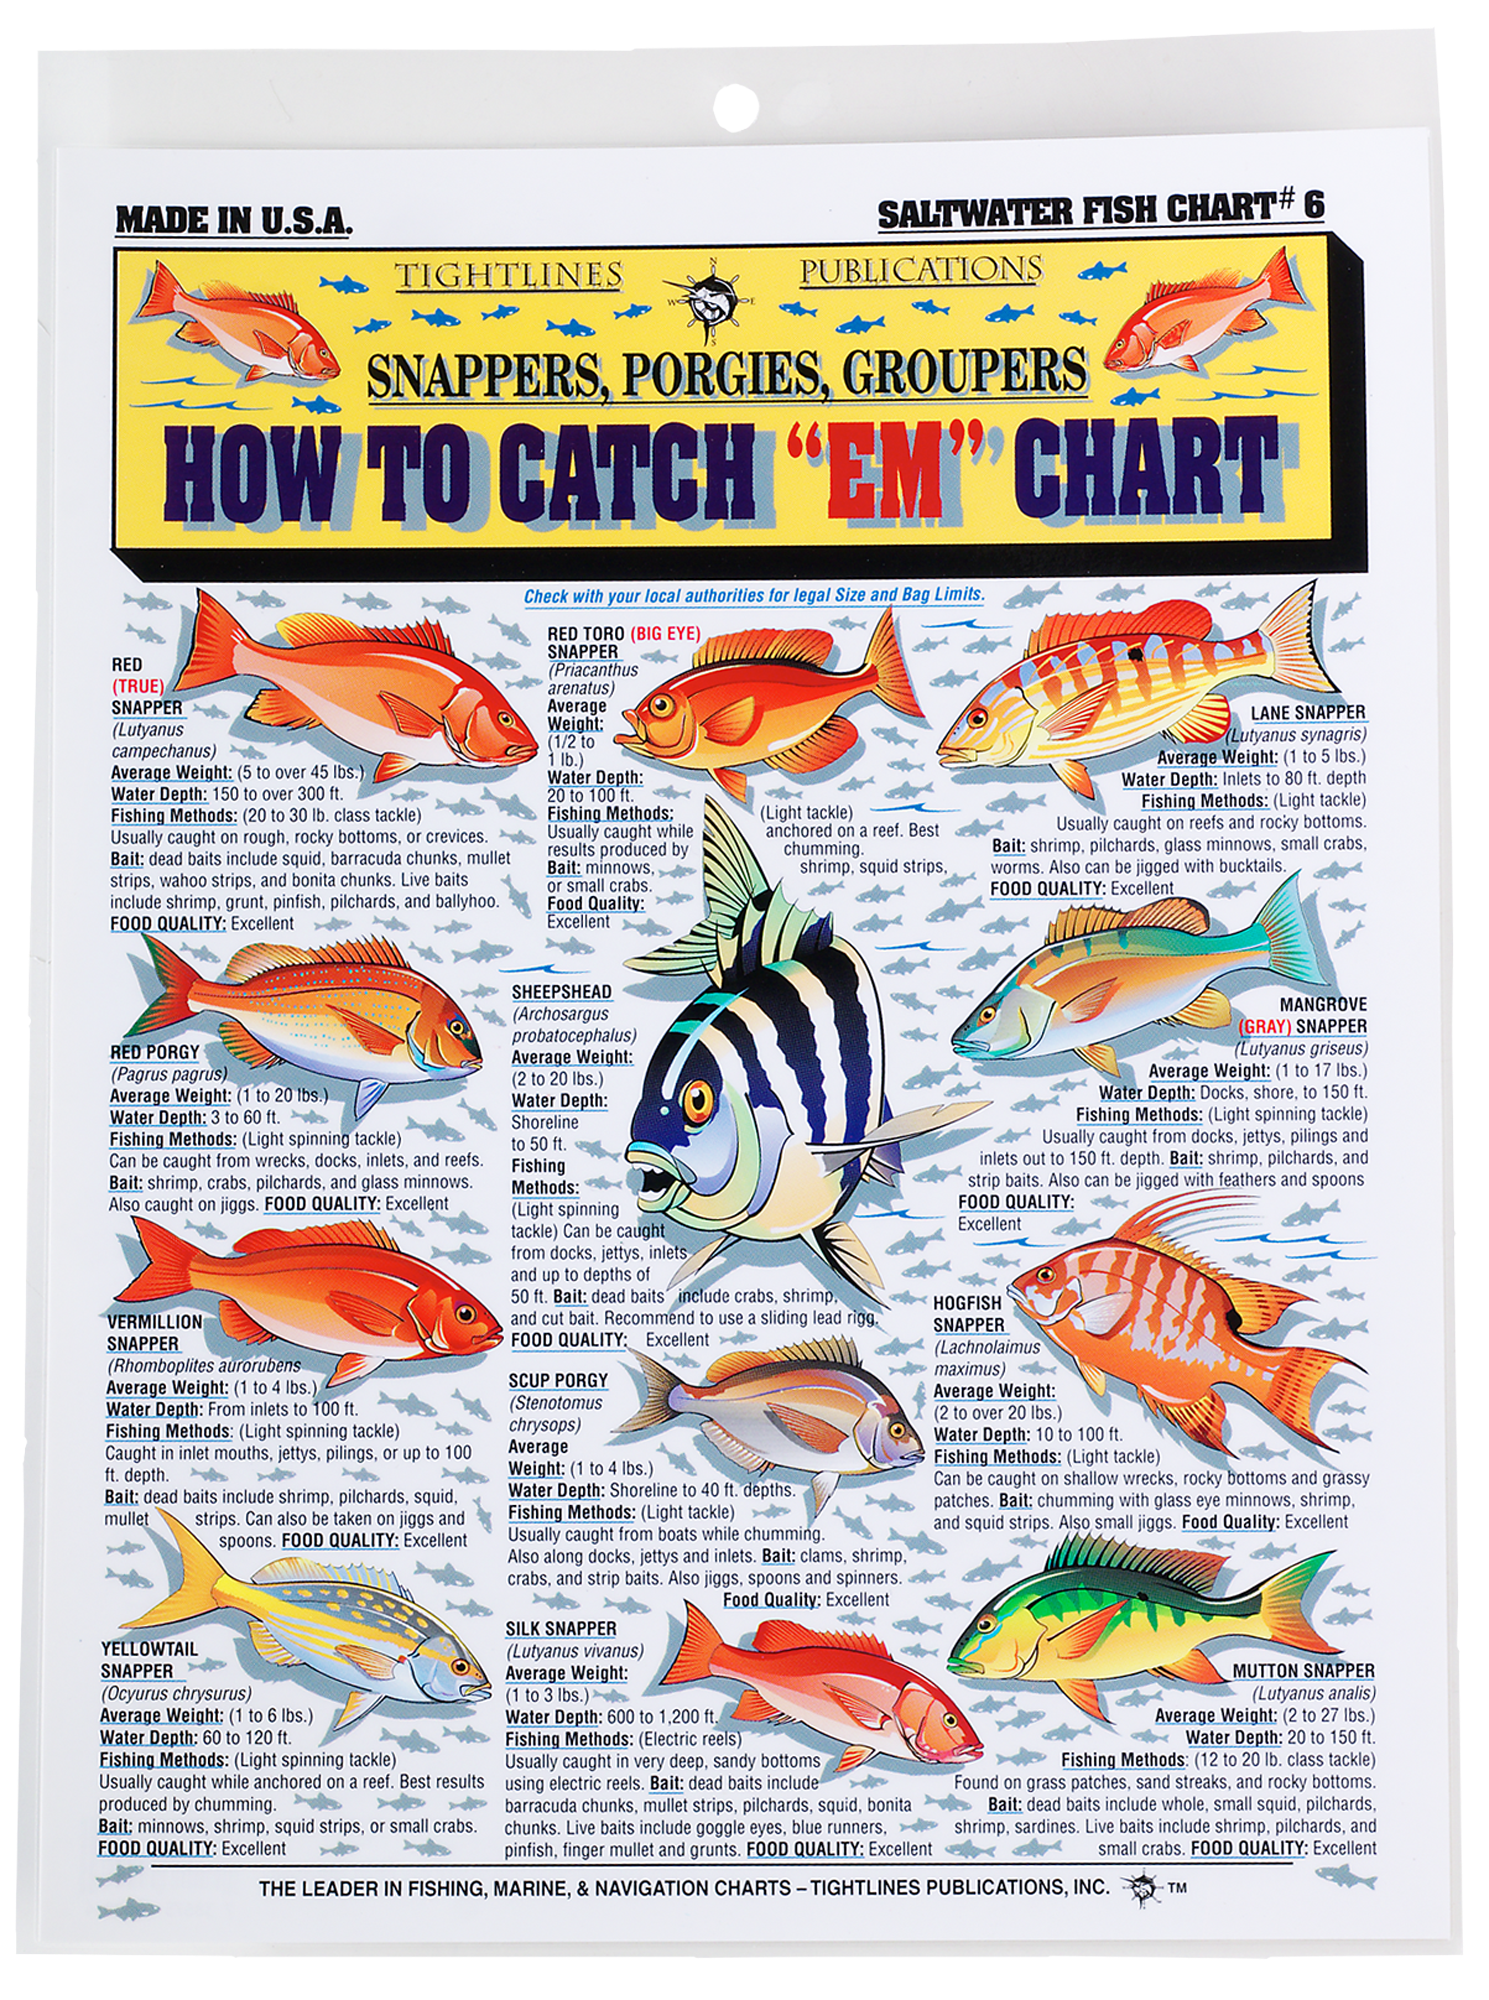 Waterproof Fish ID Charts for Saltwater